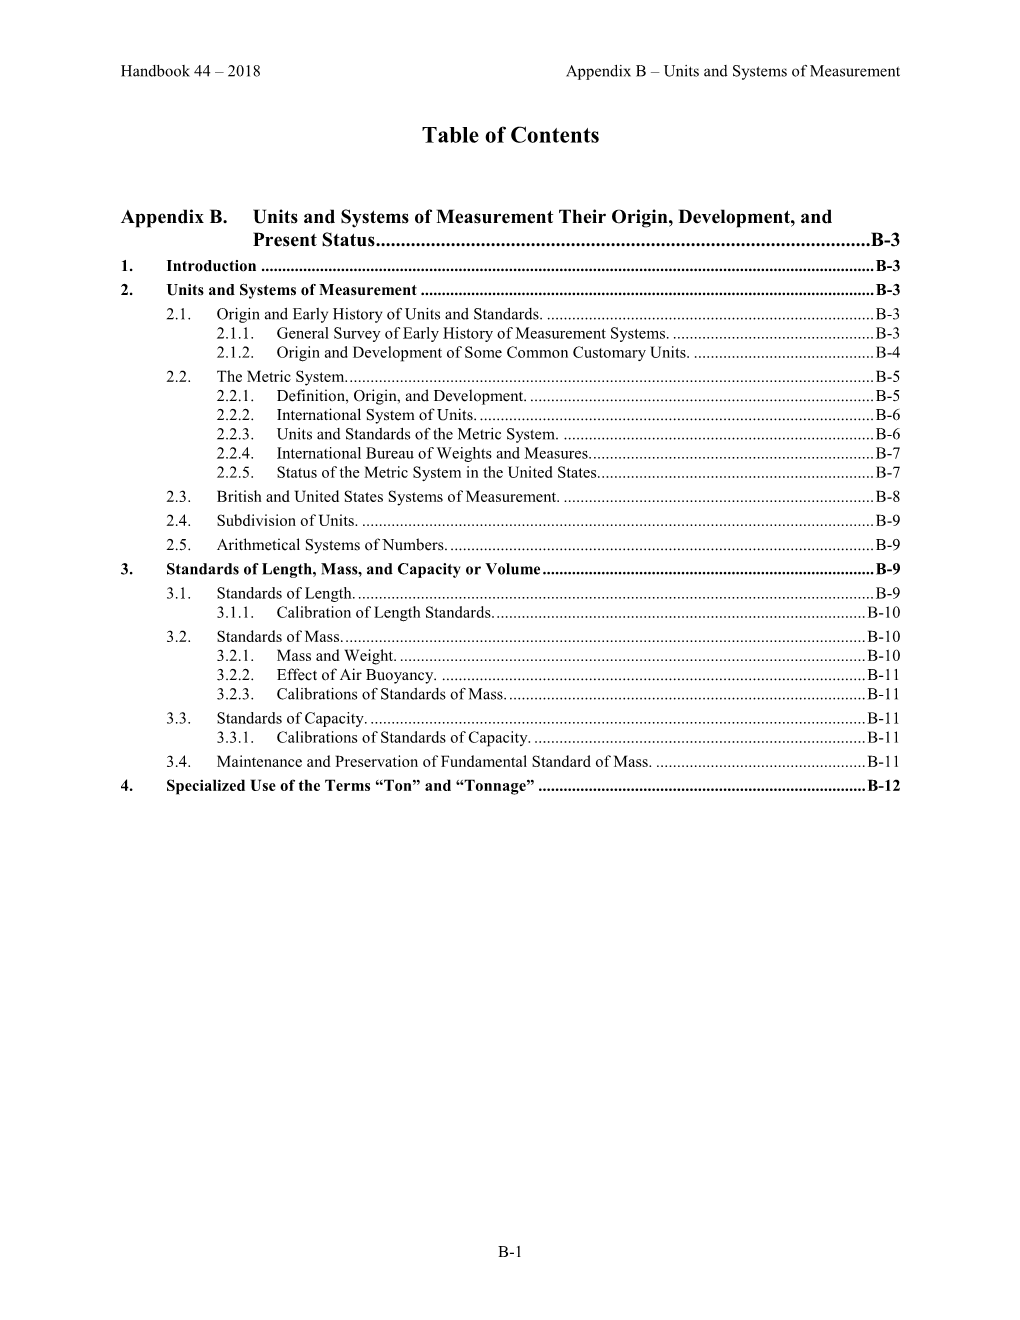 Specifications, Tolerances, and Other Technical Requirements For